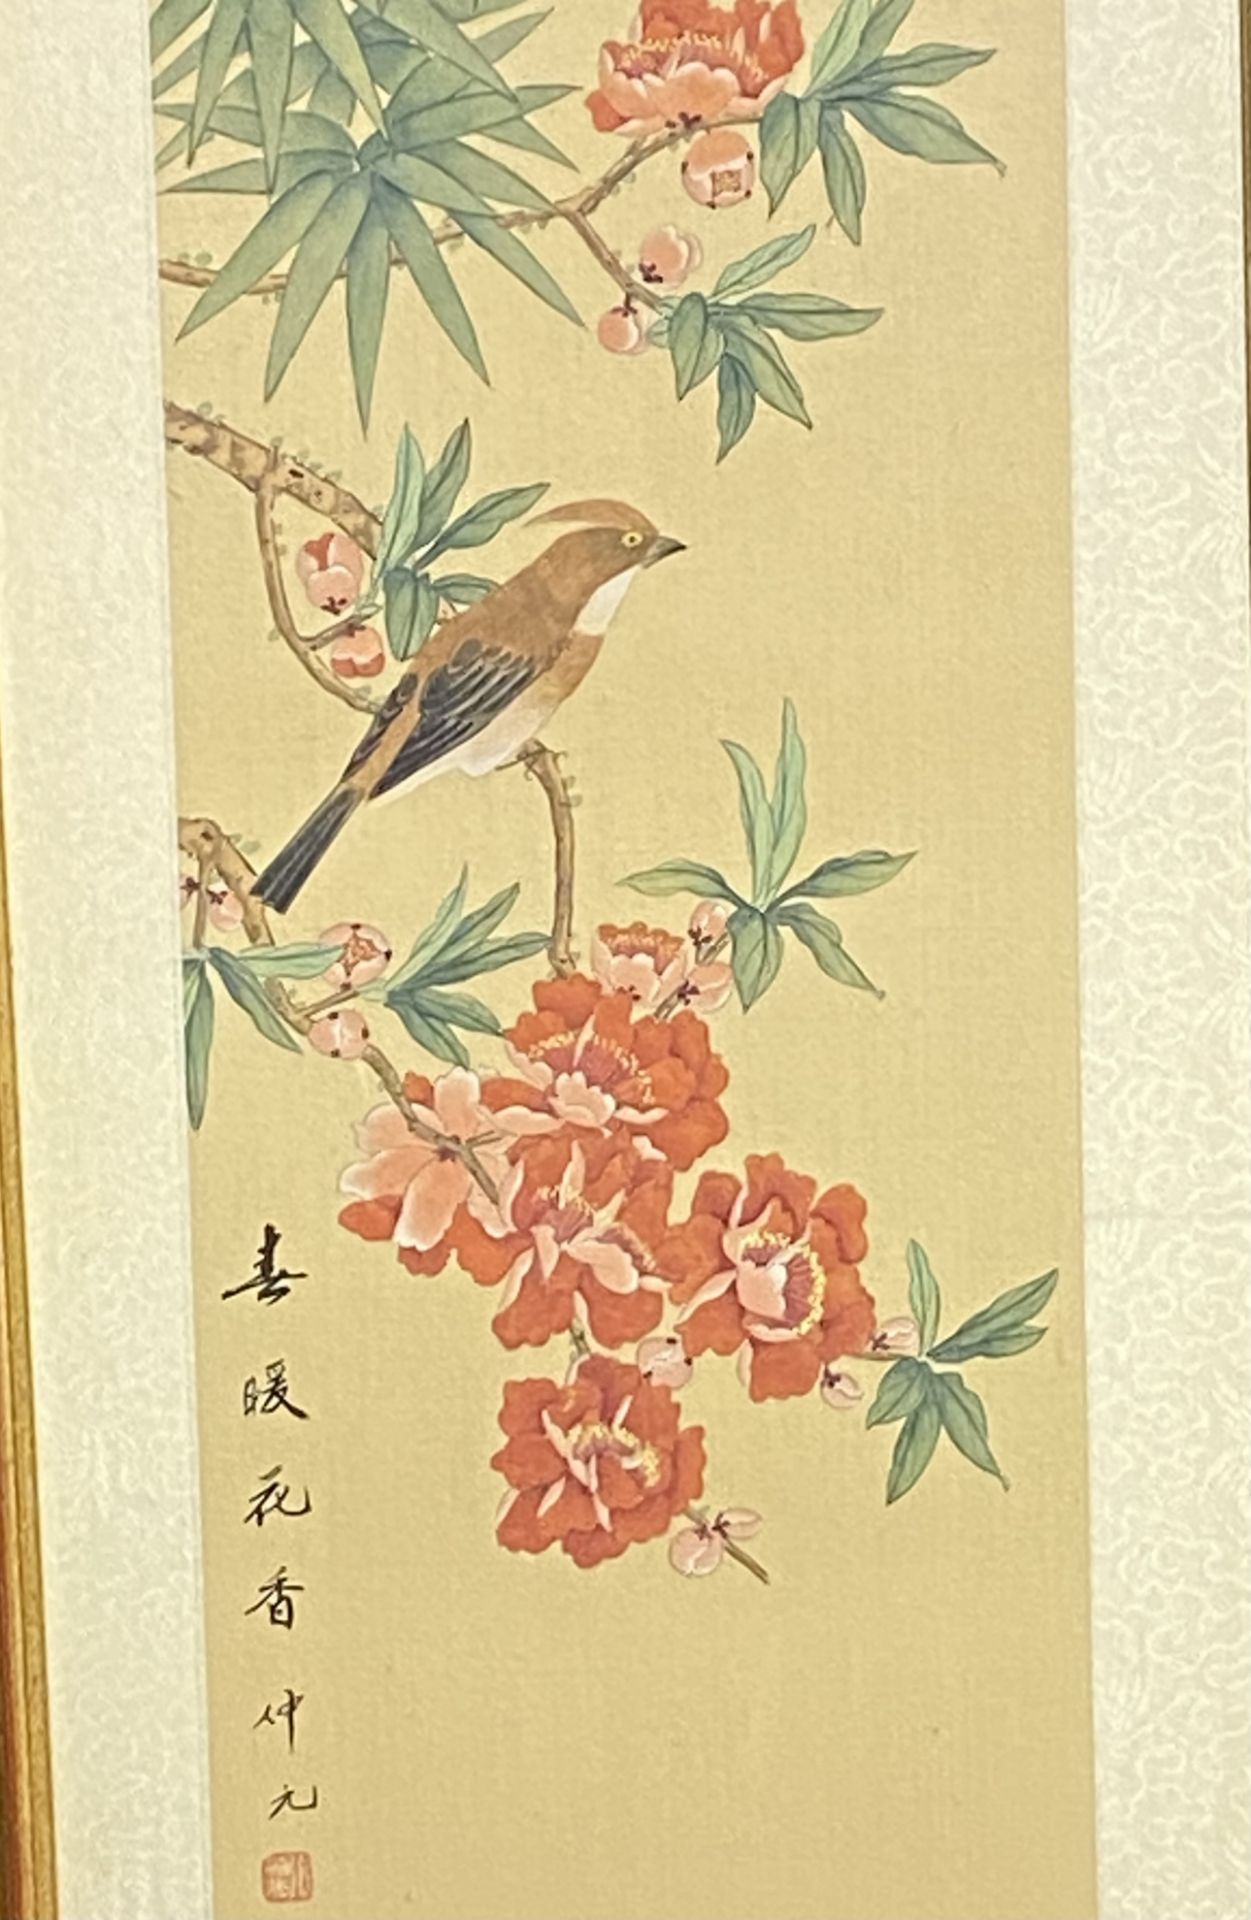 Framed and glazed Japanese woodblock print - Image 2 of 5